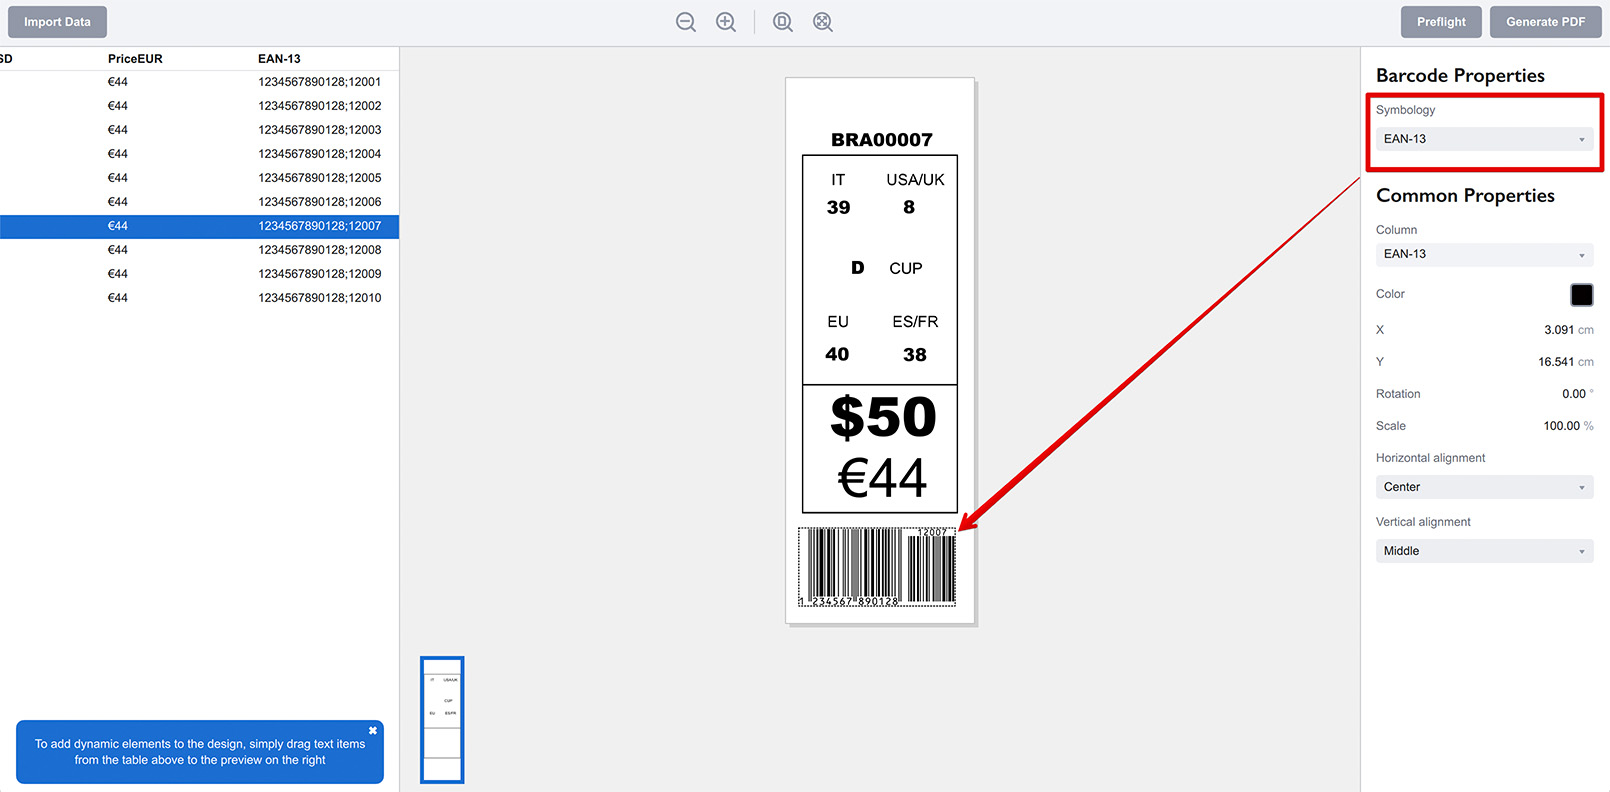 QR code is changed to EAN-13 in the price tag